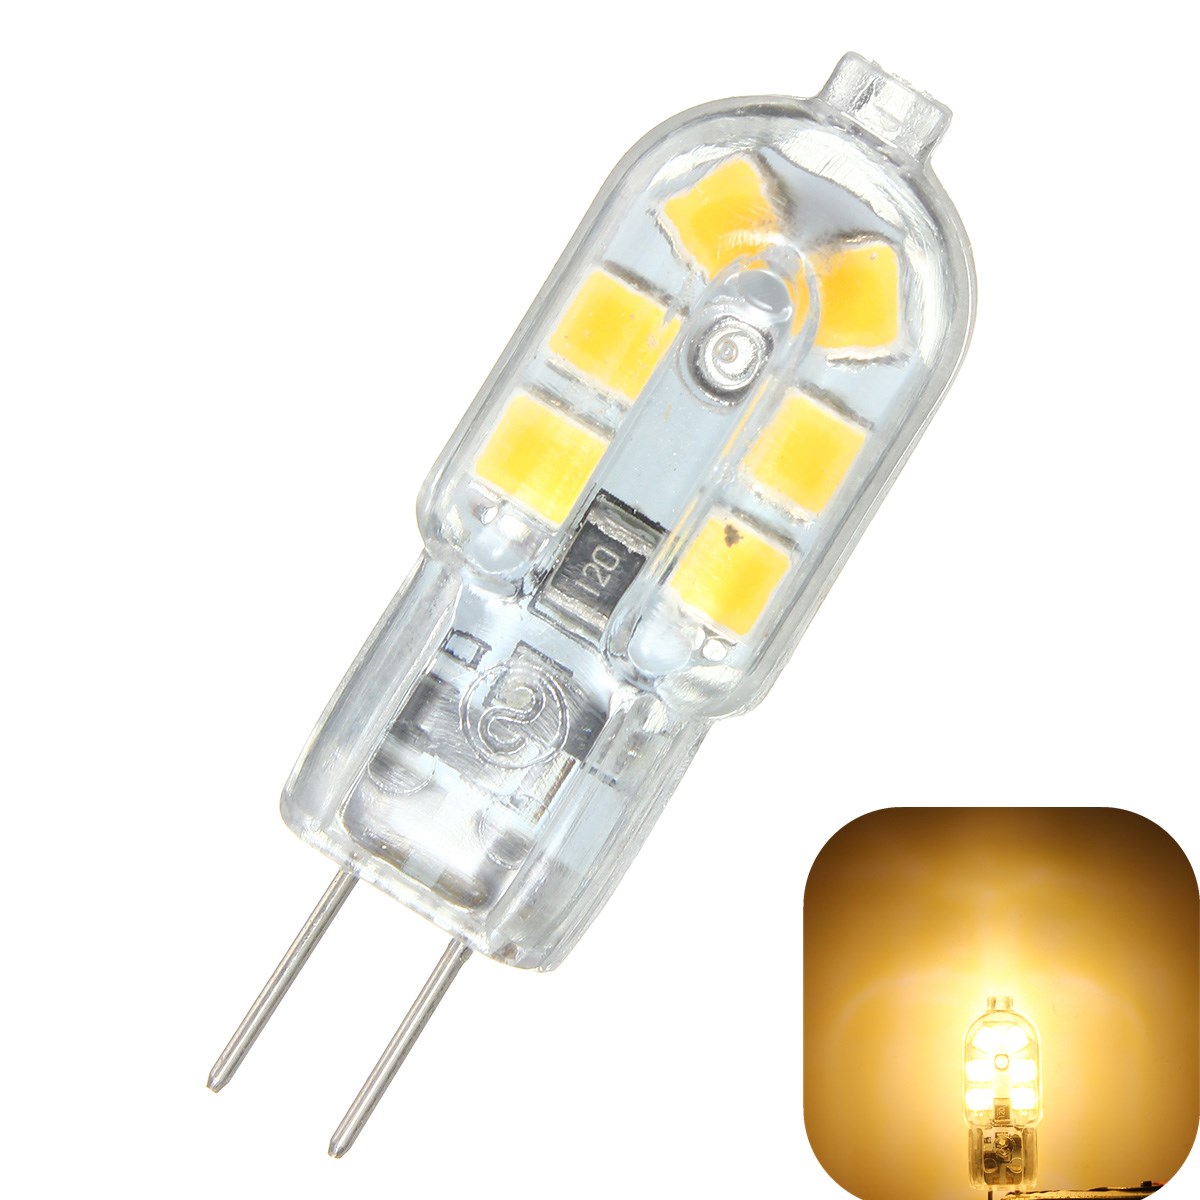 

10PCS G4 2W Non-dimmable SMD2835 Warm White Transparent Cover LED Light Bulb for Indoor Home Decor DC12V